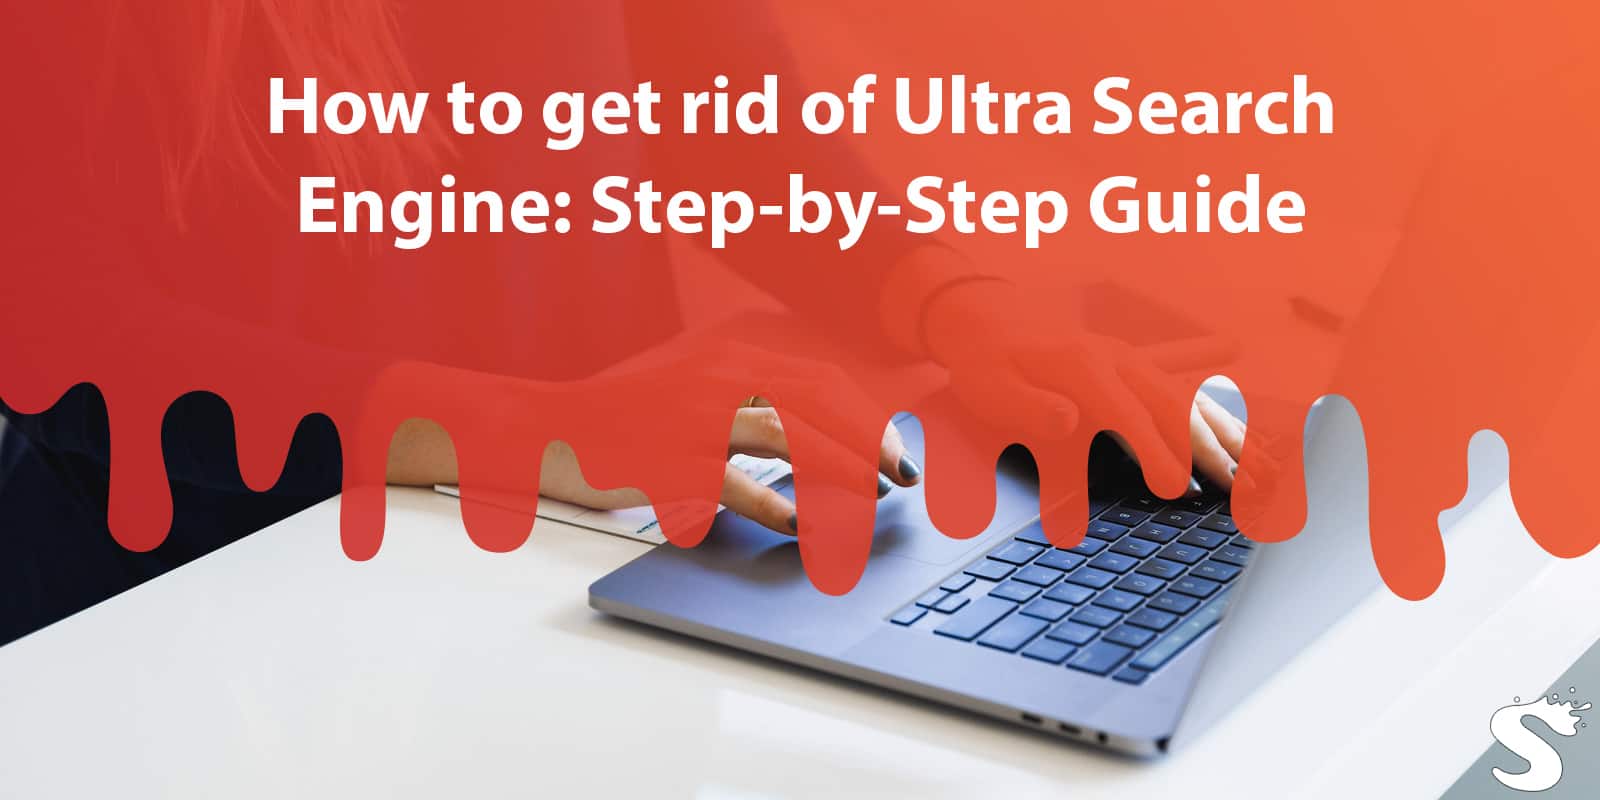 How to get rid of Ultra Search Engine: Step-by-Step Guide